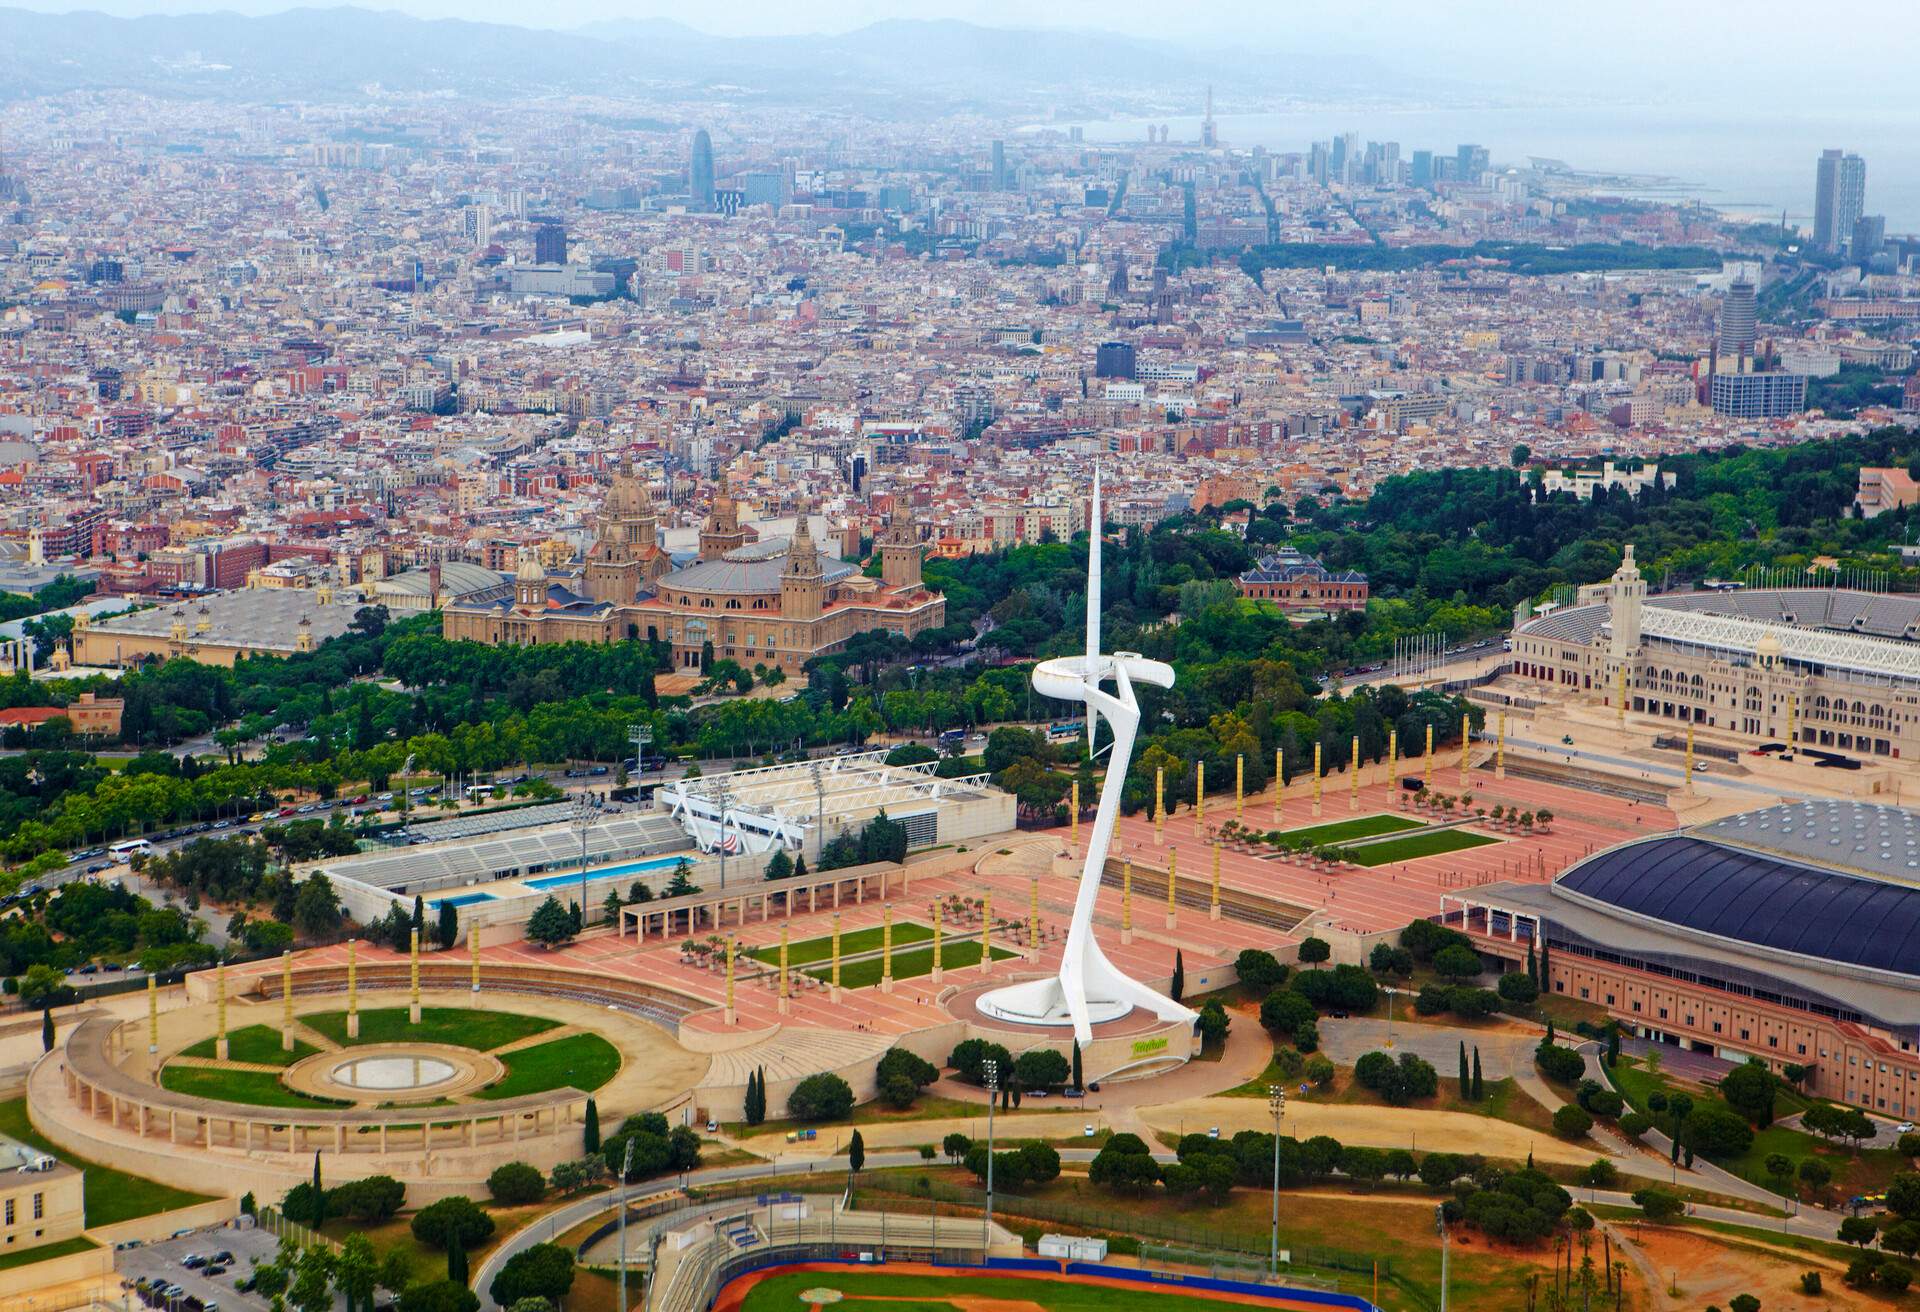 Ariel view from helicopter of Montjuic and skyline of Barcelona